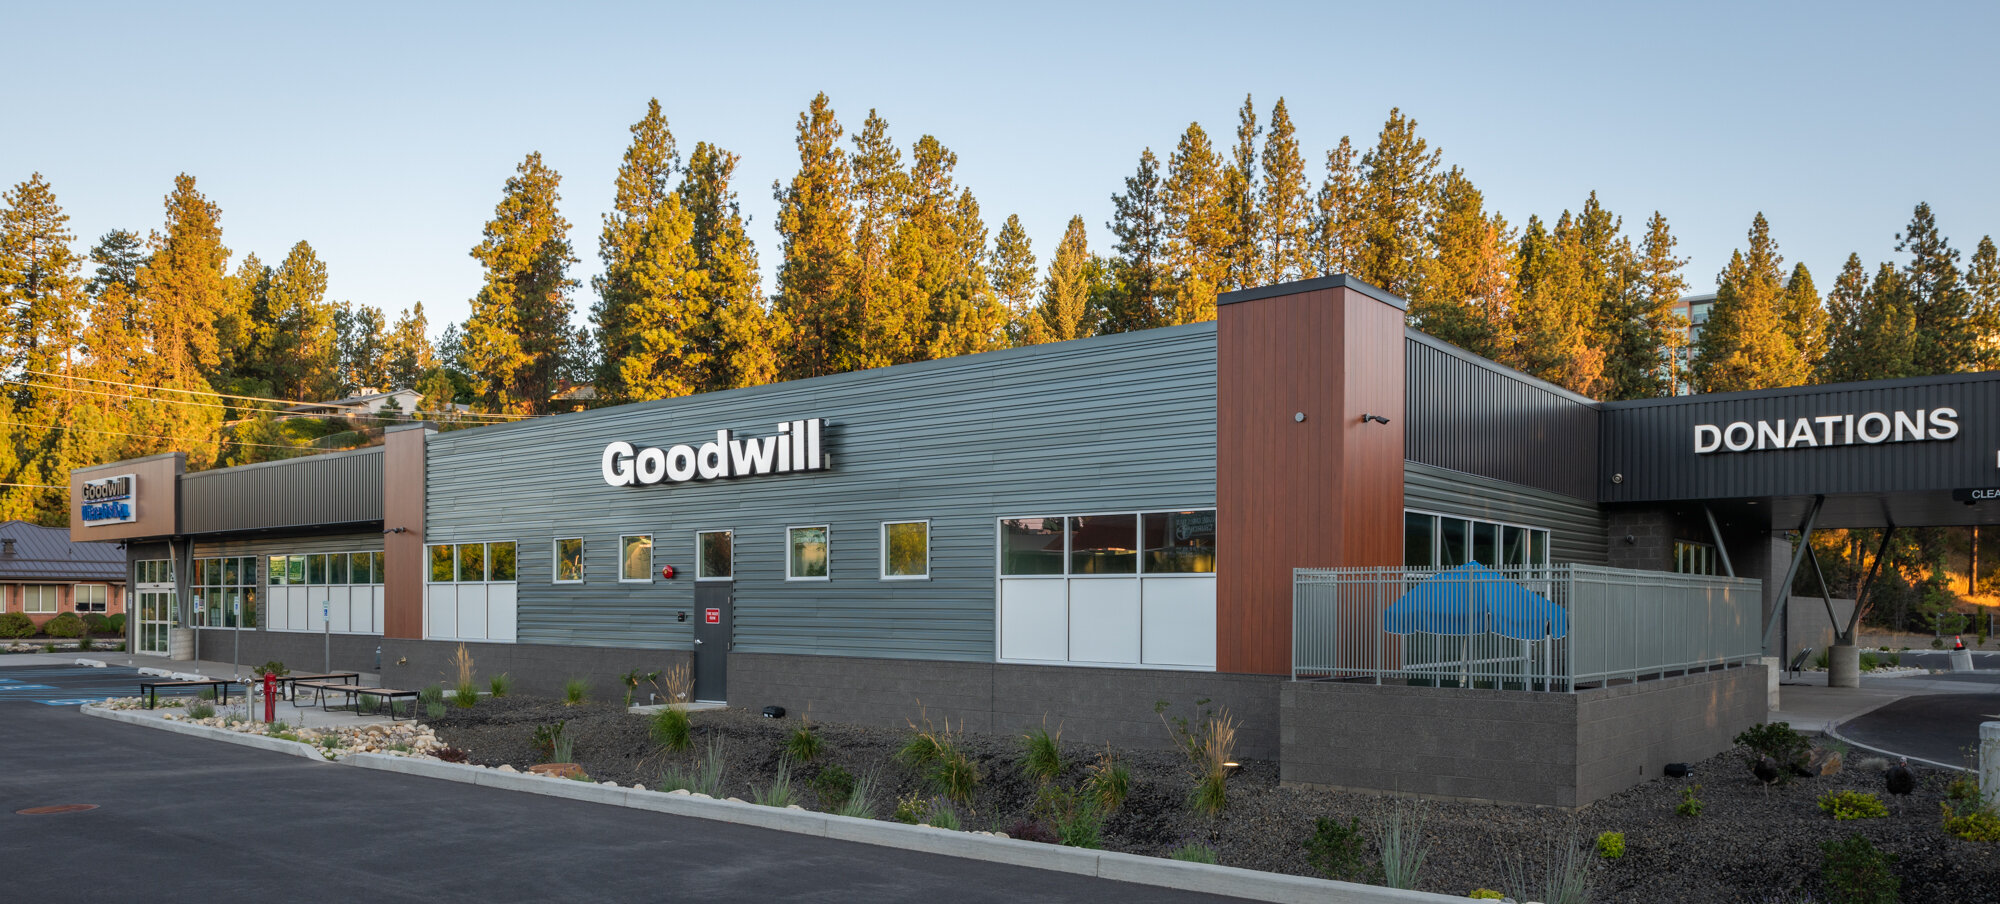 5 Goodwill-Lo-Res-5.jpg